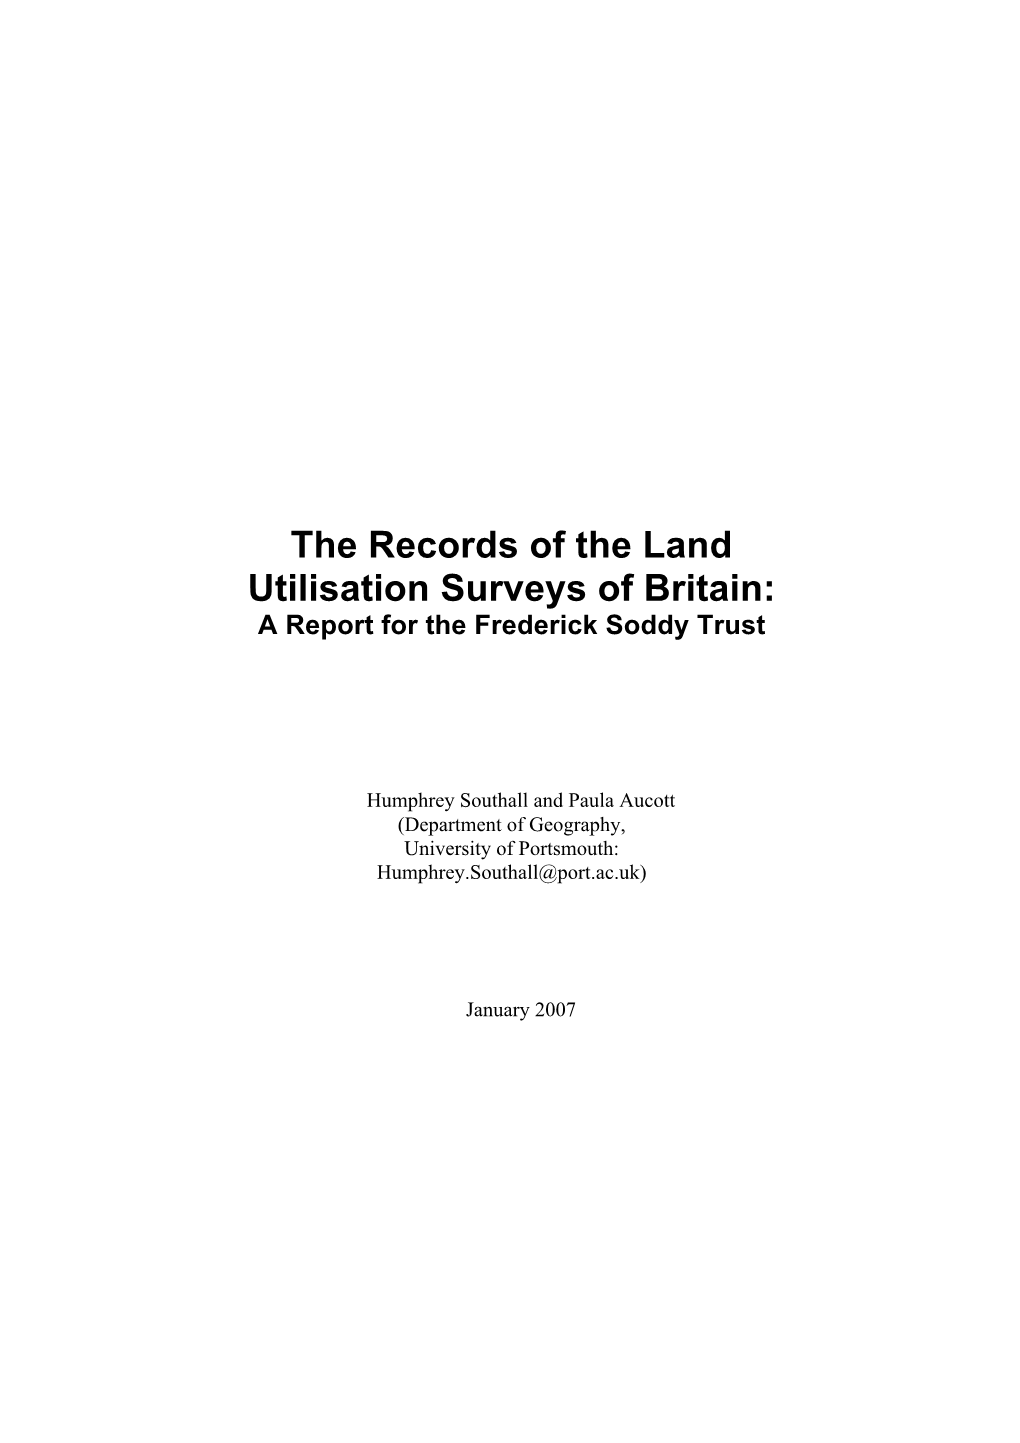 The Records of the Land Utilisation Surveys of Britain: a Report for the Frederick Soddy Trust